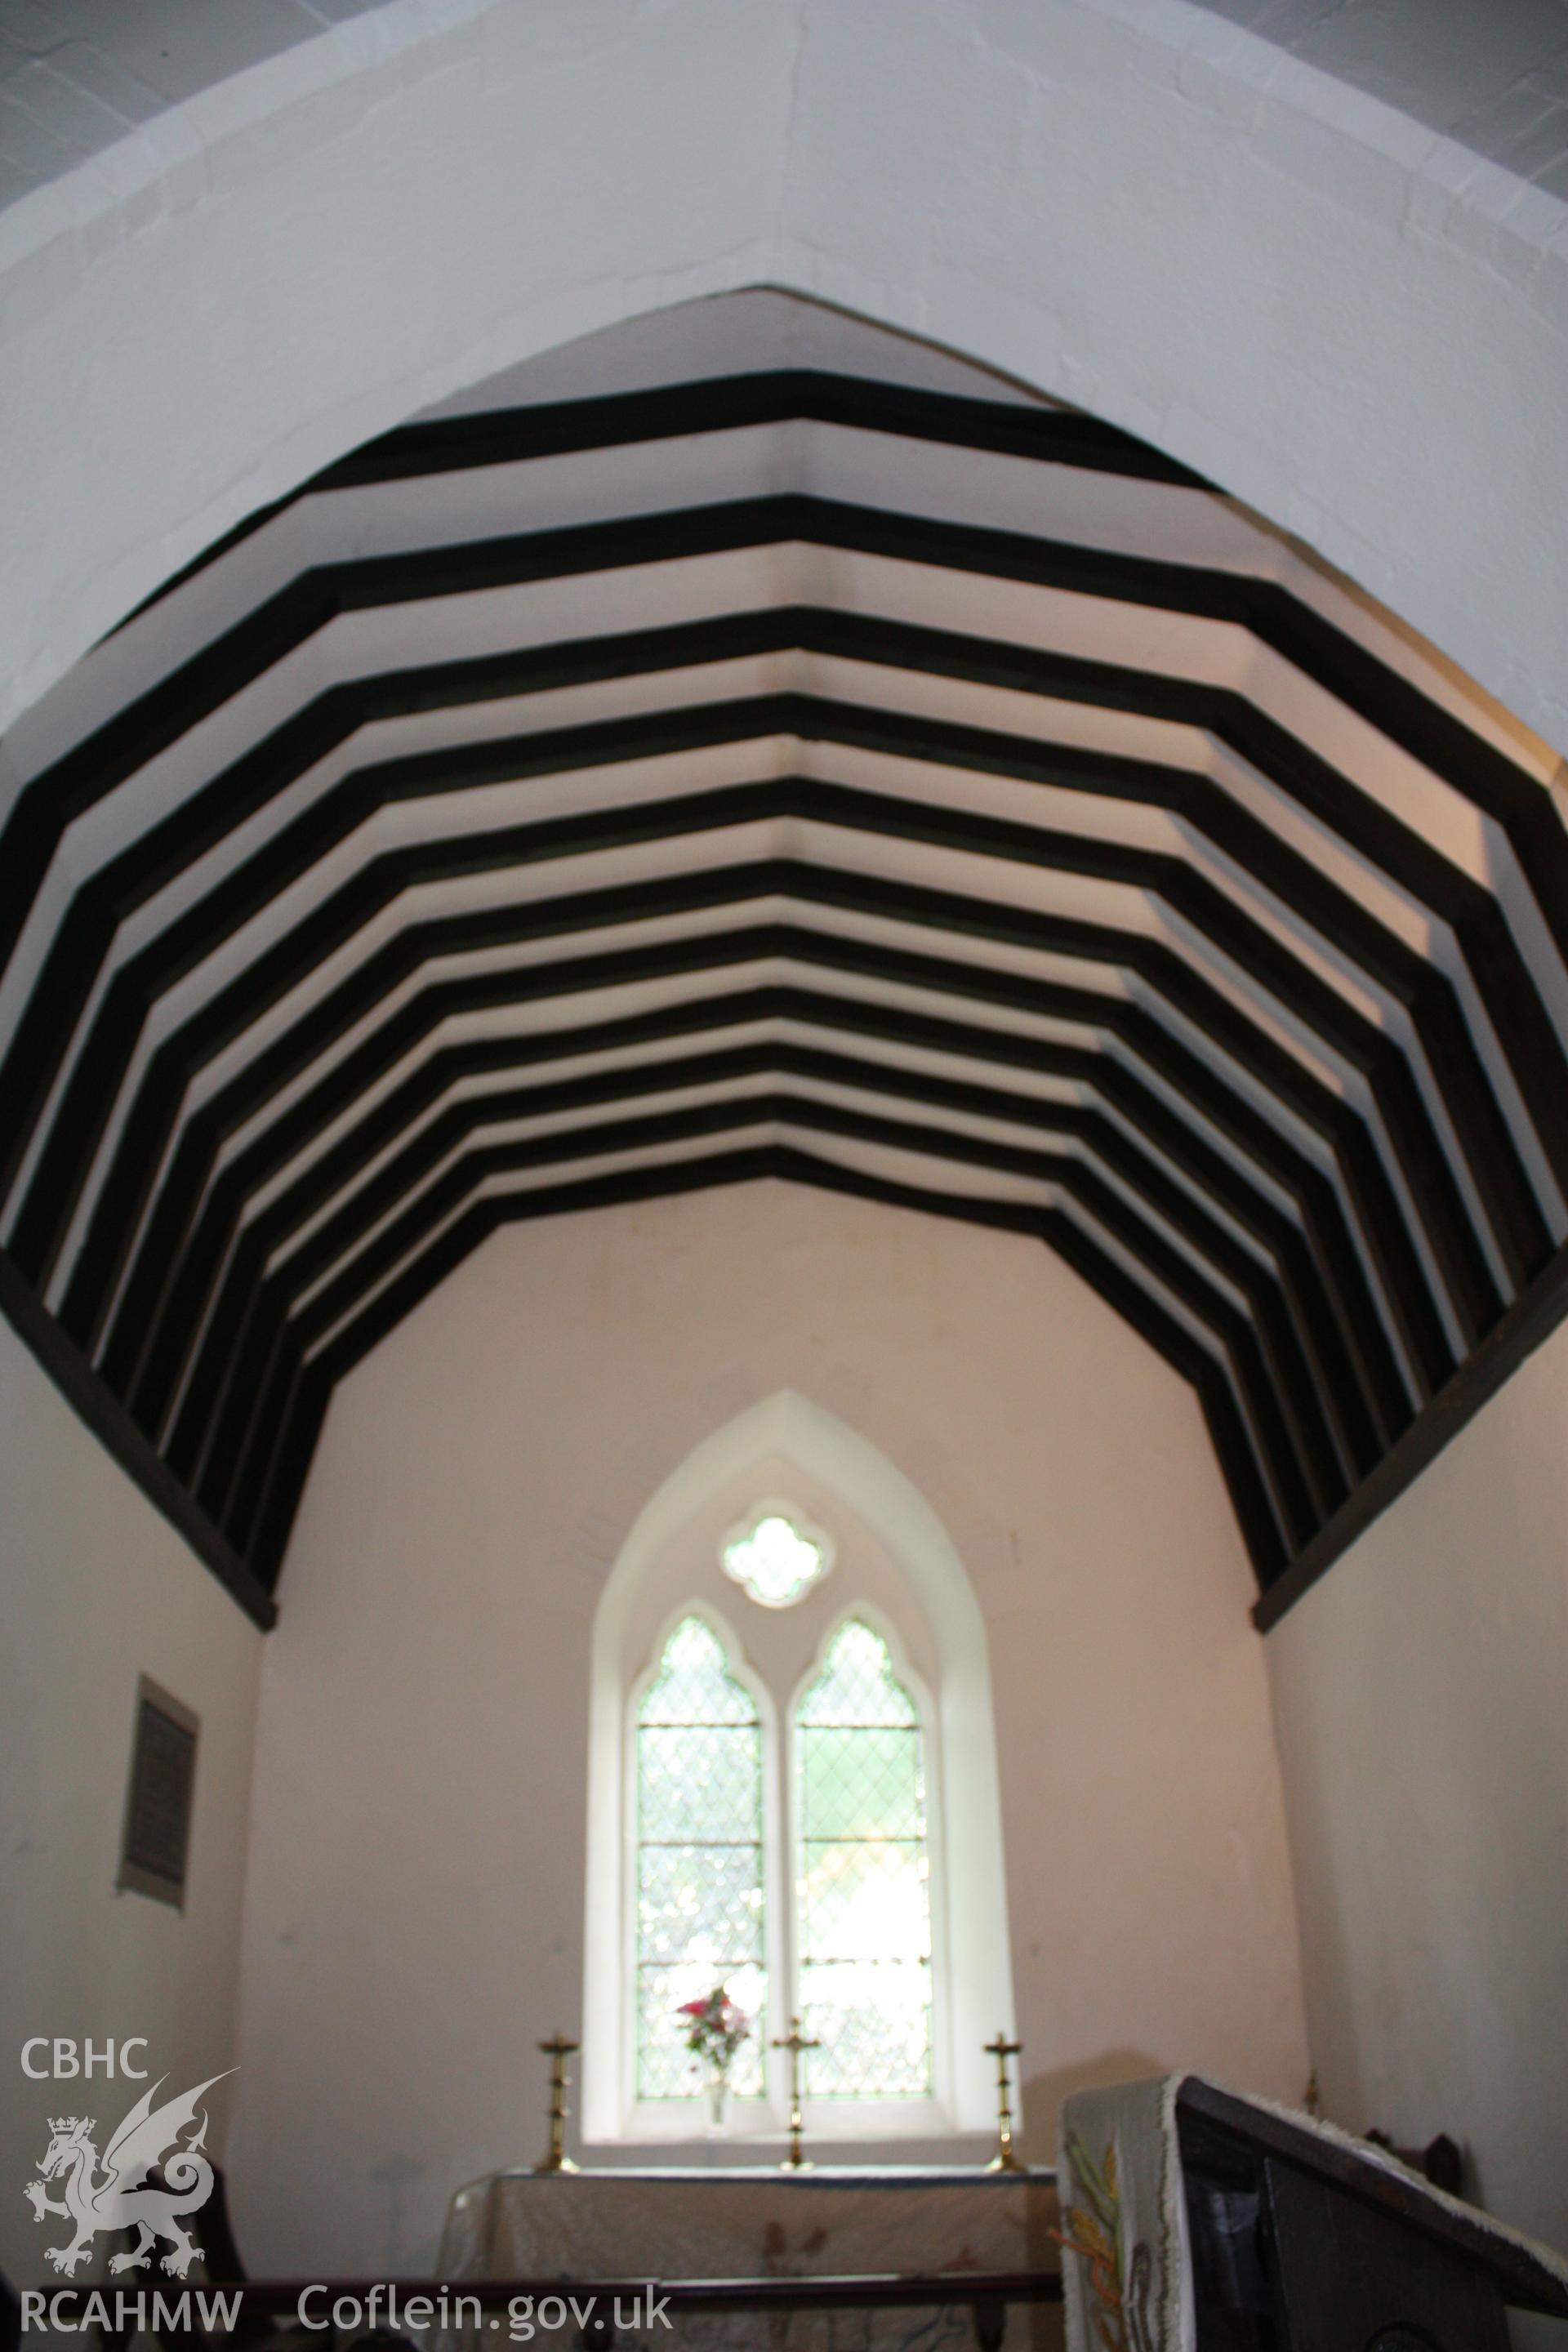 Roof of the chancel